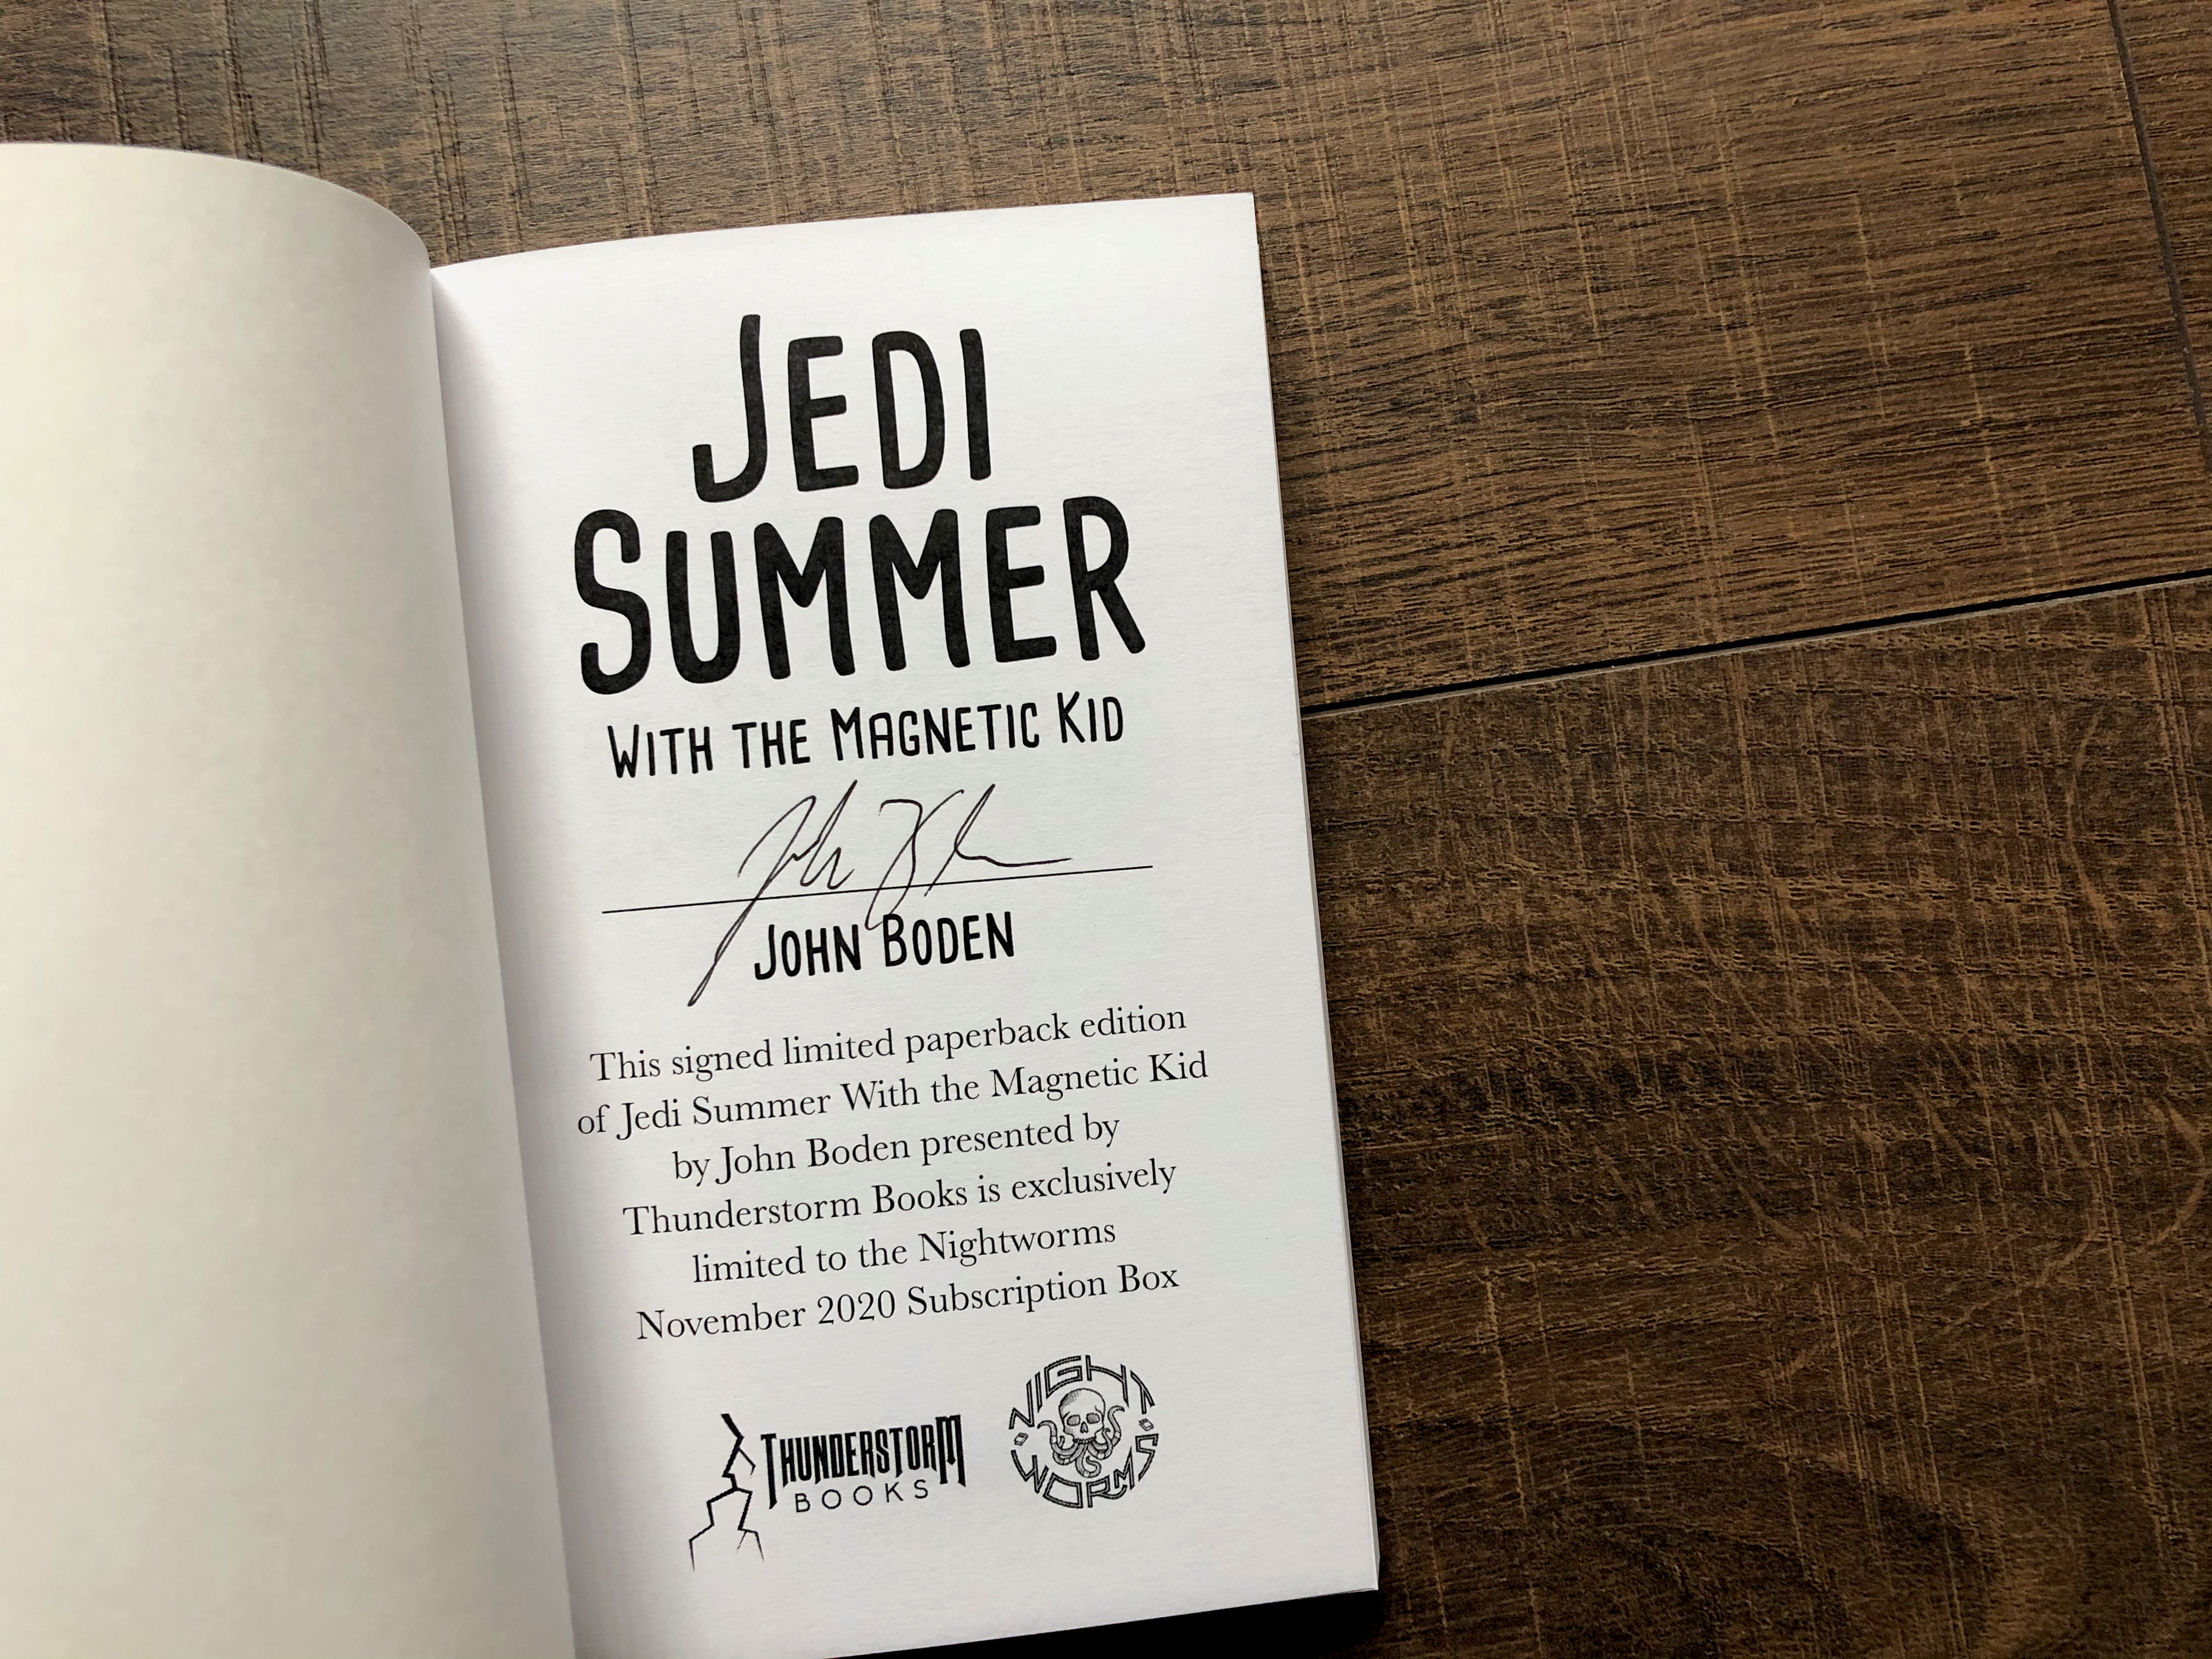 Jedi Summer With the Magnetic Kid by John Boden Signature